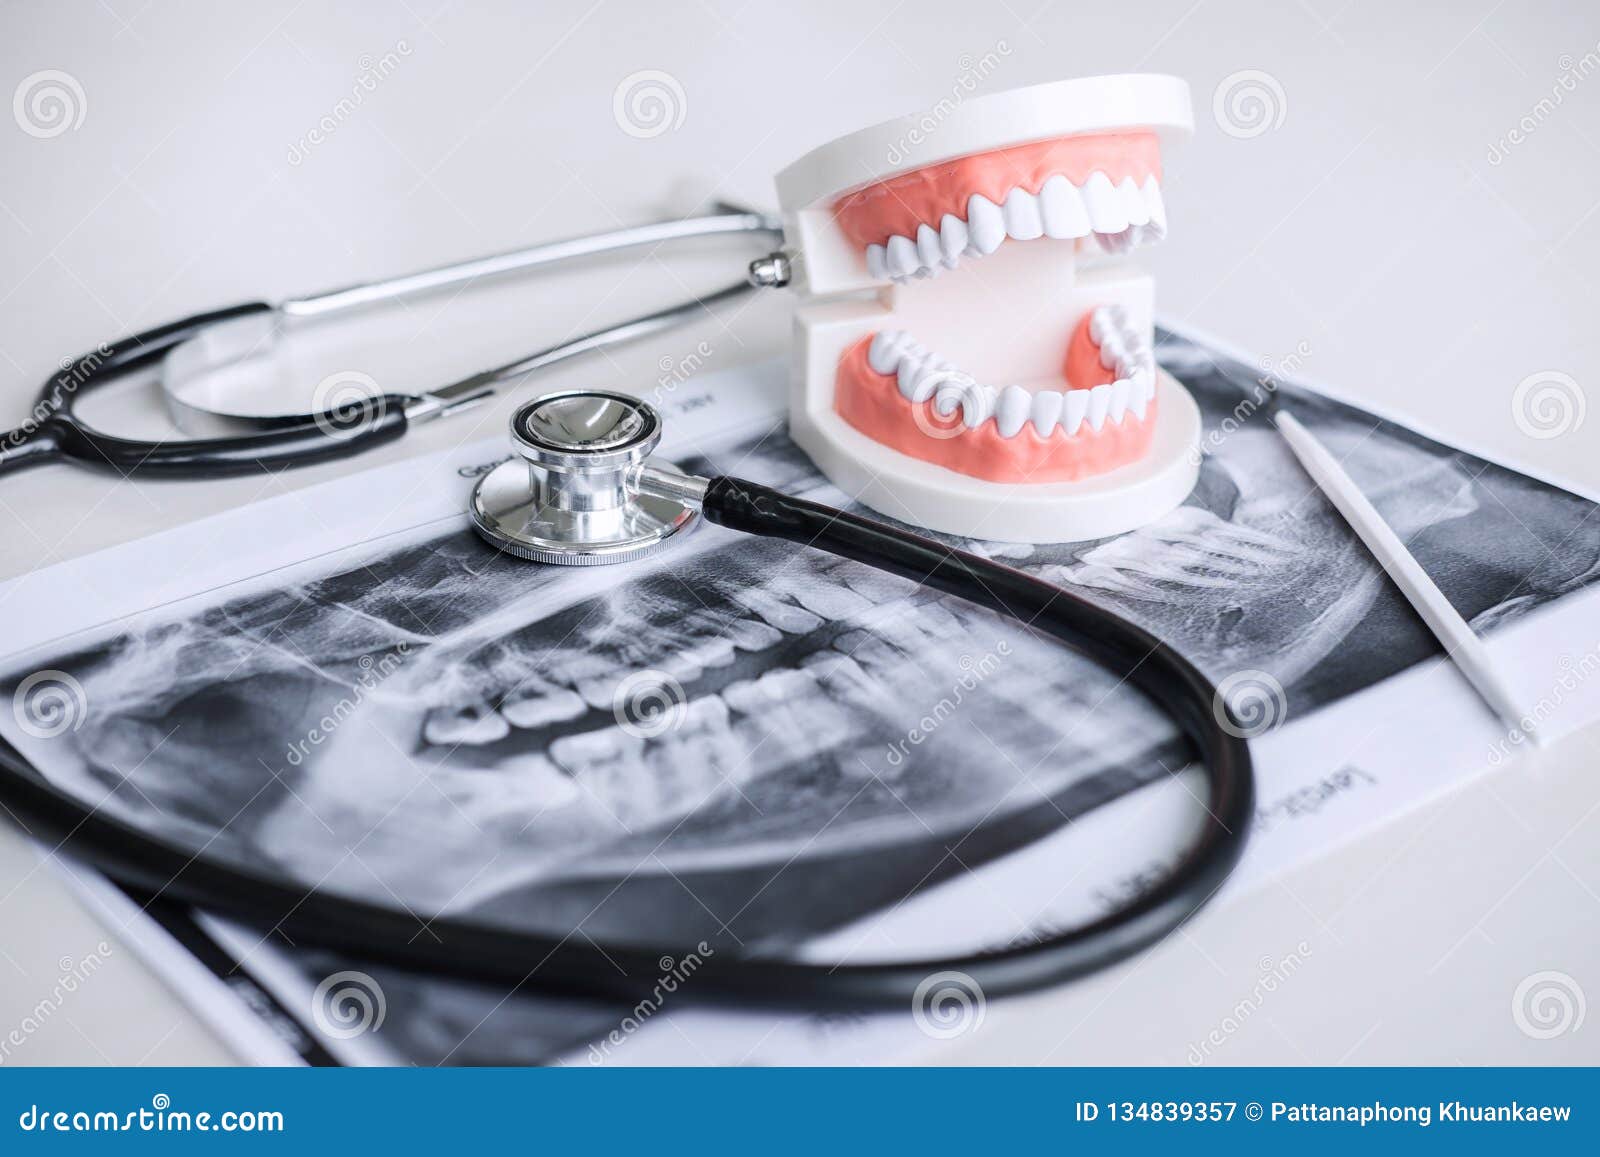 dental model and equipment on tooth x-ray film and stethoscope used in the treatment of dental and dentistry by dentist